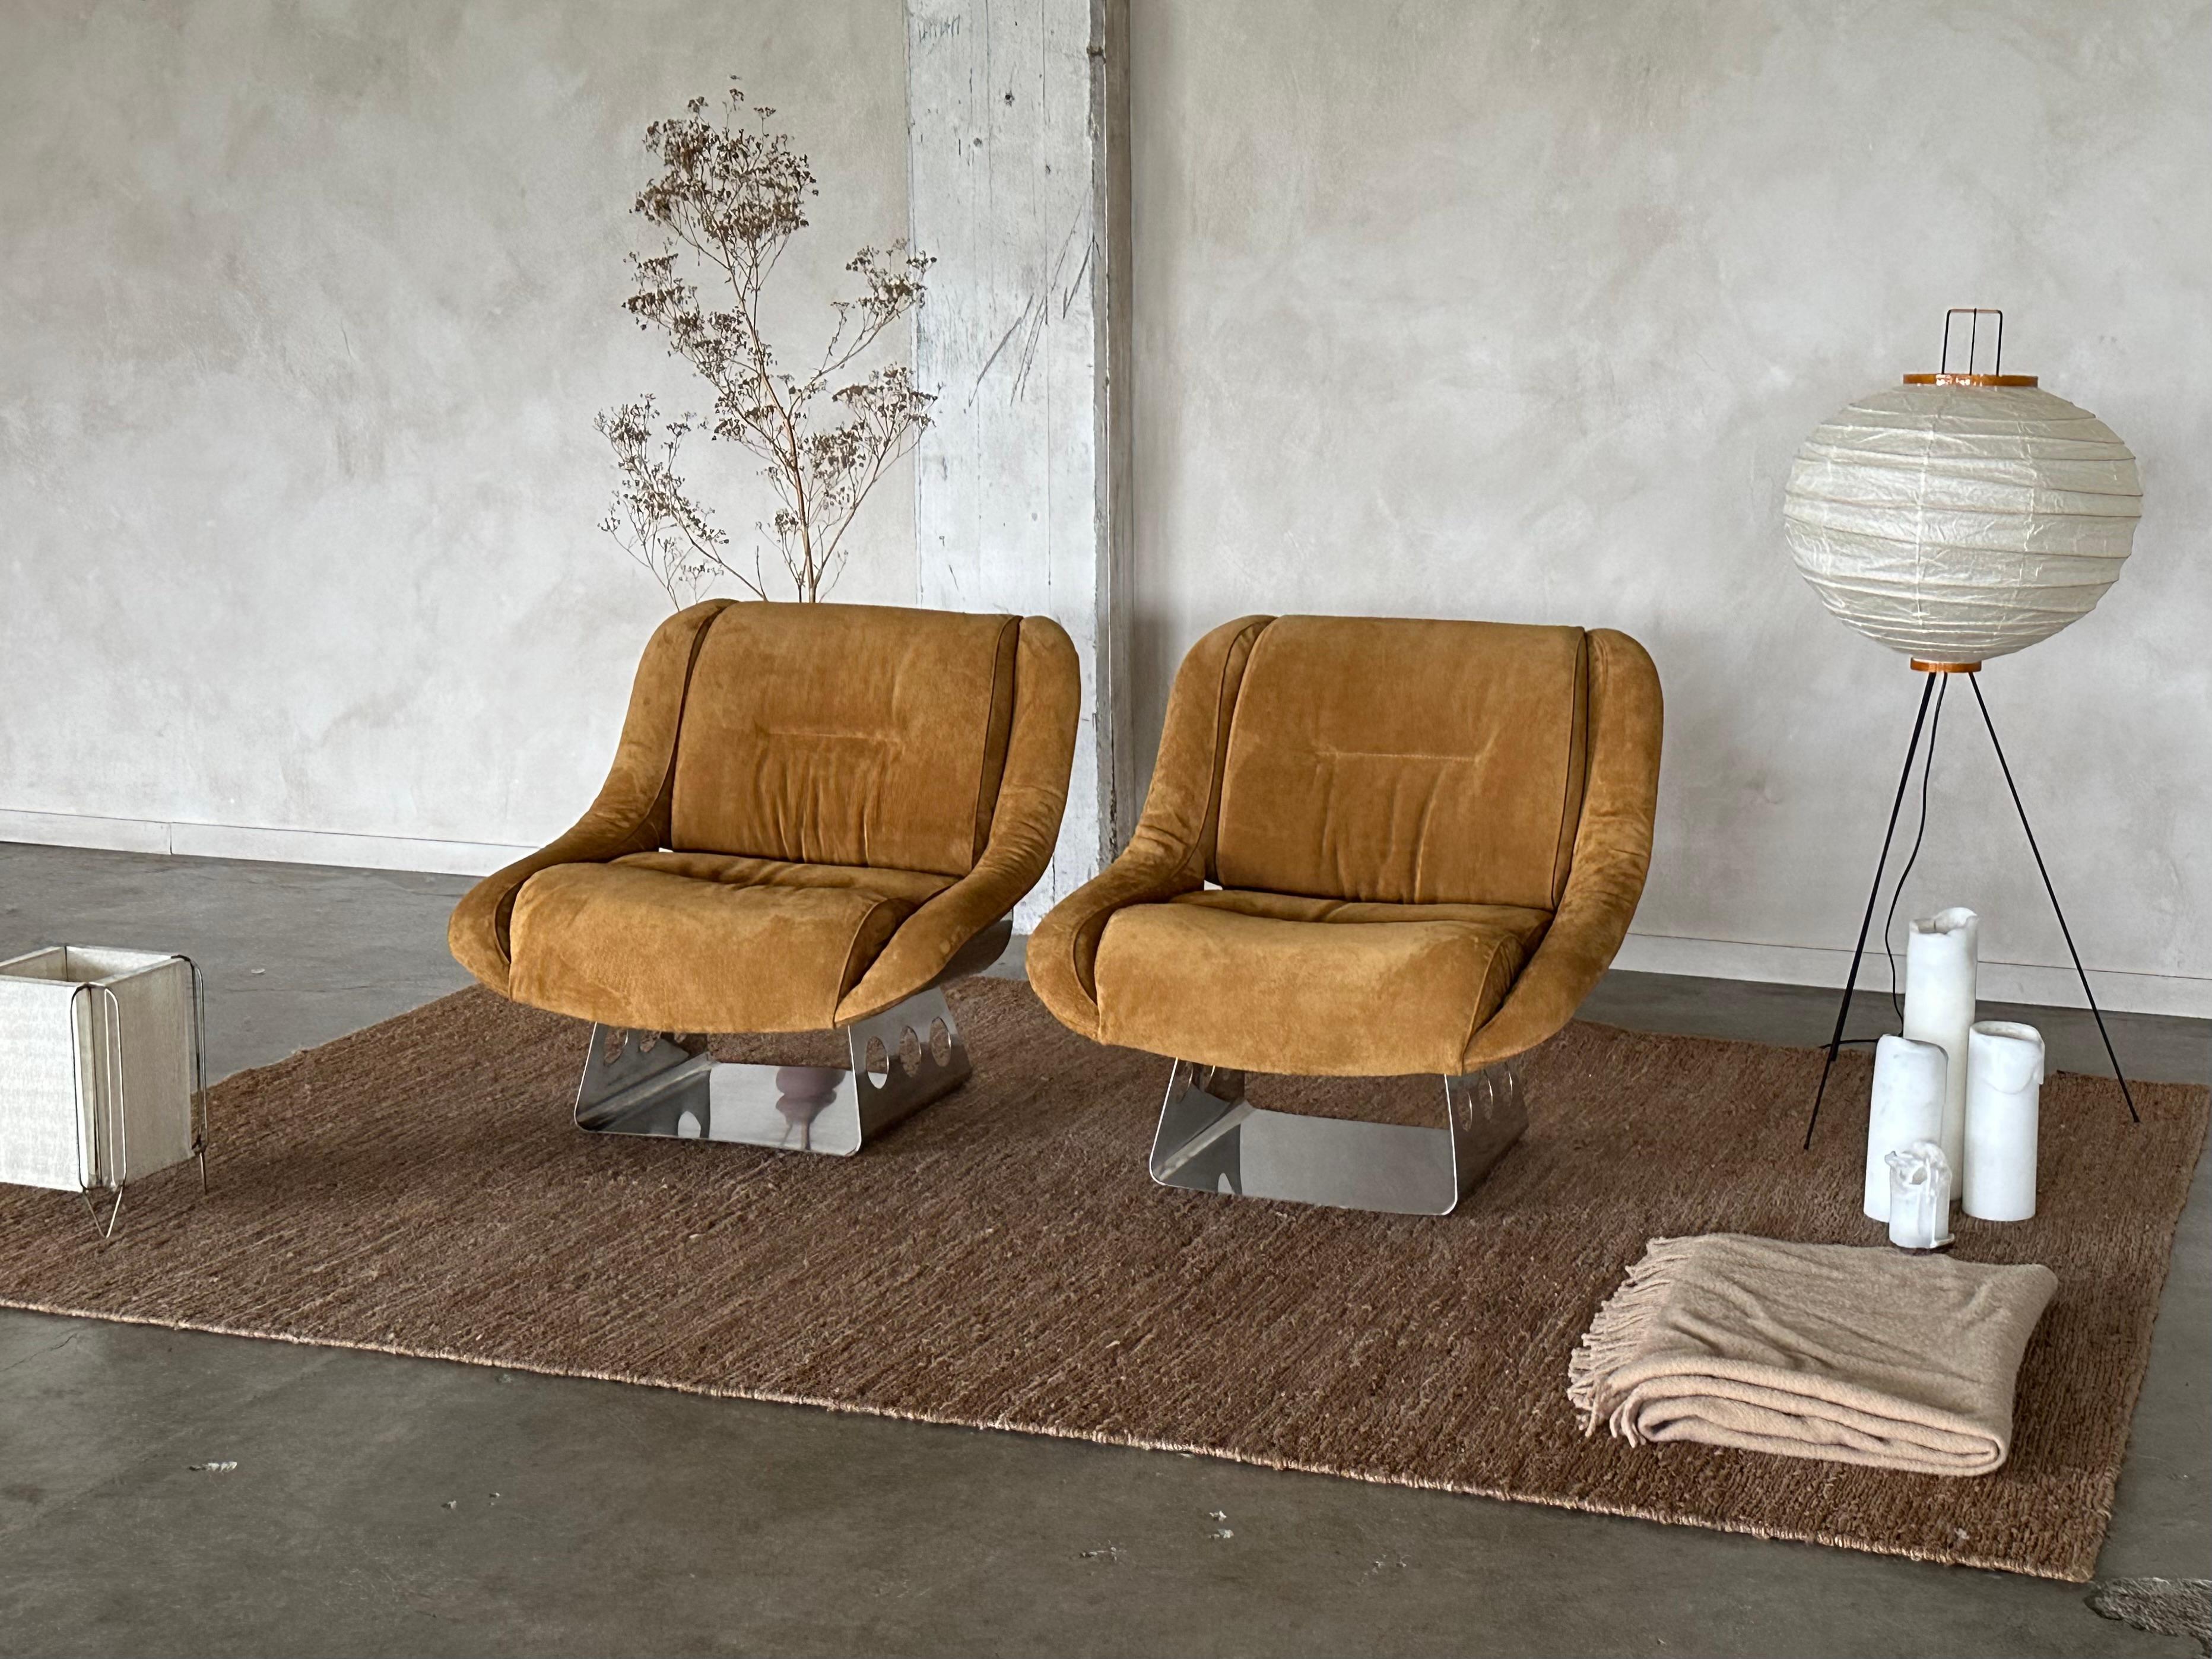 Rare Suede and Stainless Steel Lounge Chairs by Rima Padova, 1974 10